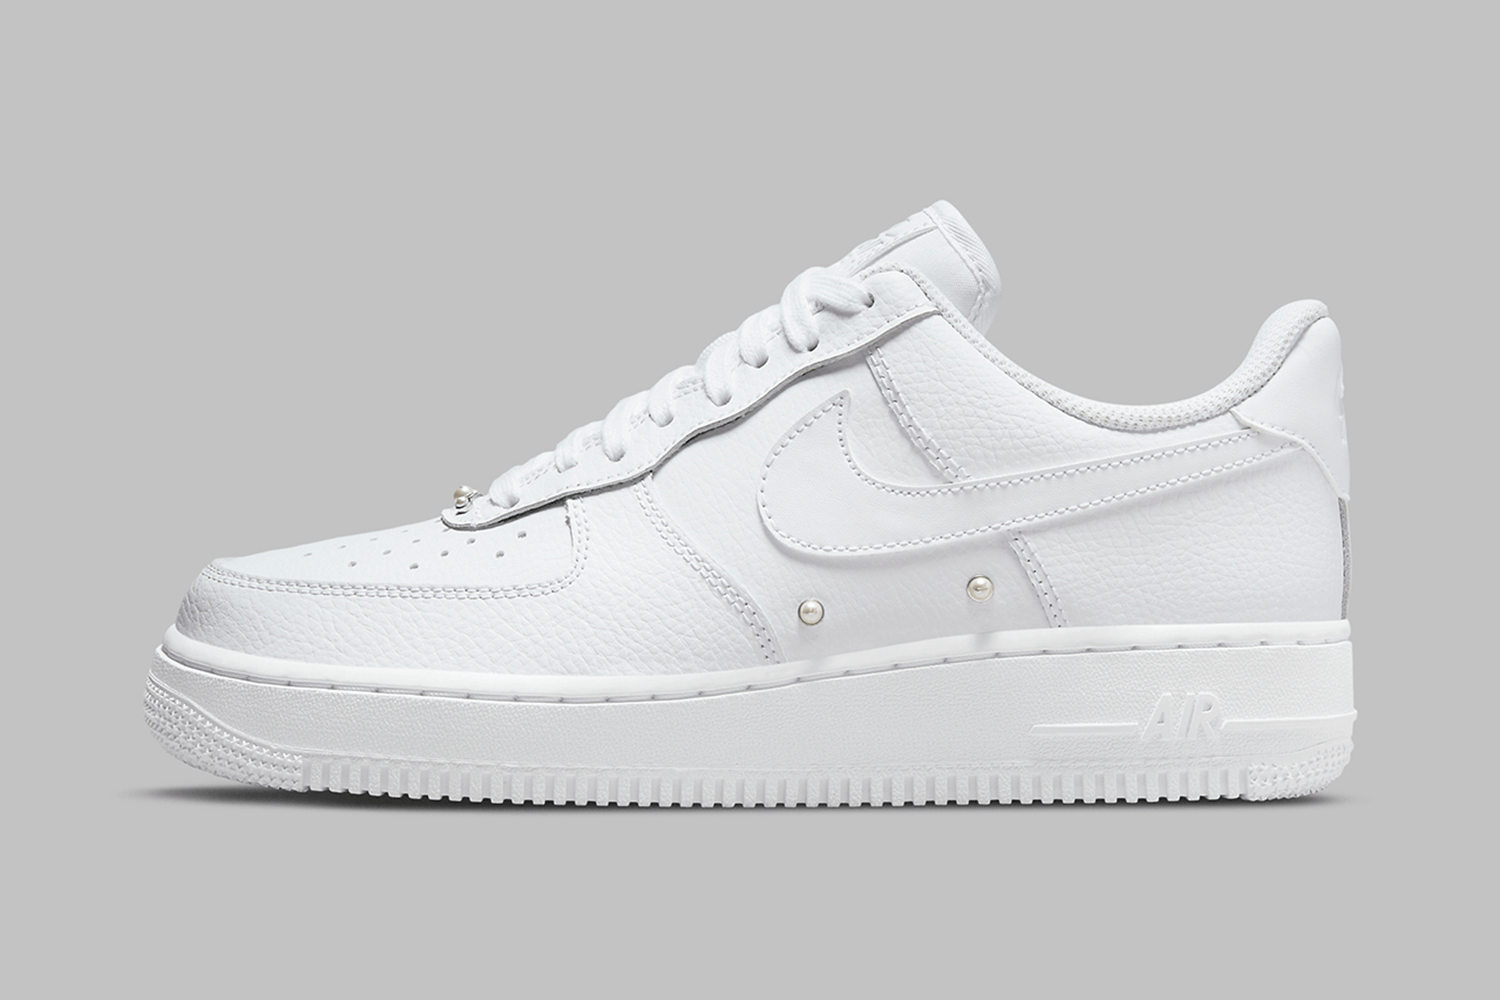 A new Nike Air Force 1 drops with Pearl Studs